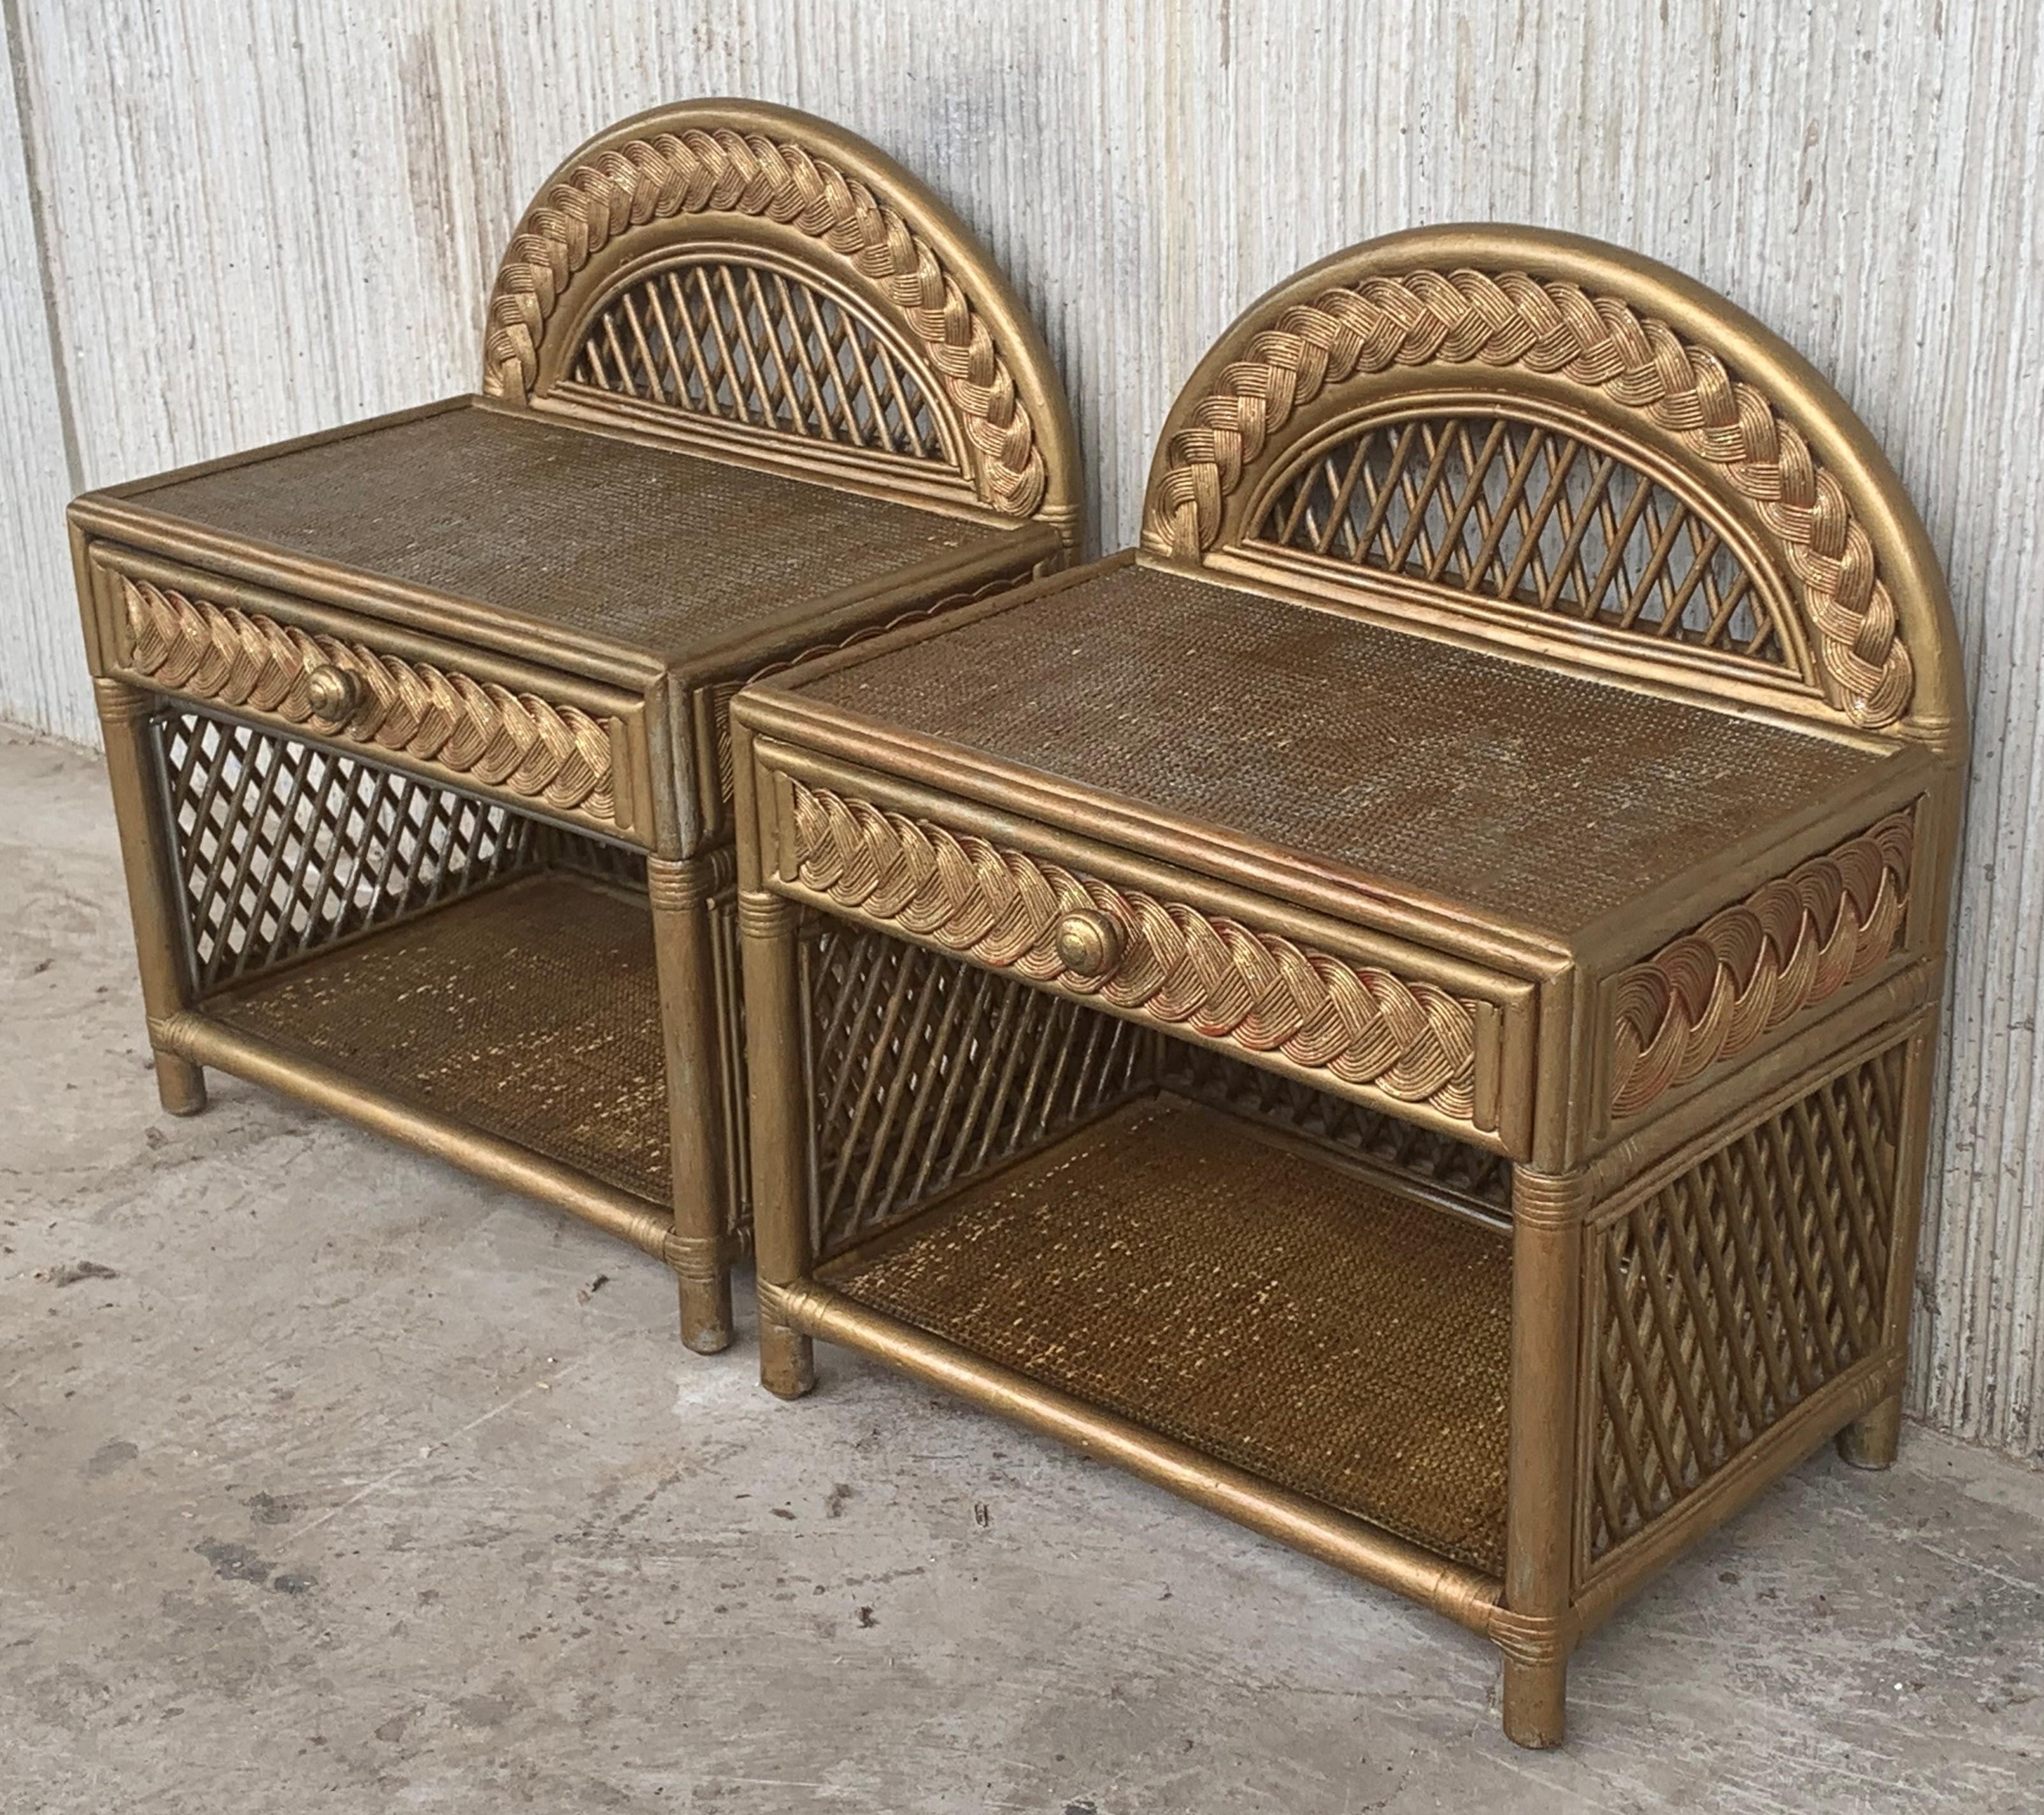 Midcentury pair of bamboo and rattan gold nightstands with drawer and low shelve
Streamline stick rattan side table nightstand with grass-mat coverings, edges are finished with bentwood nails.
All rattan, bamboo and wicker furniture has been